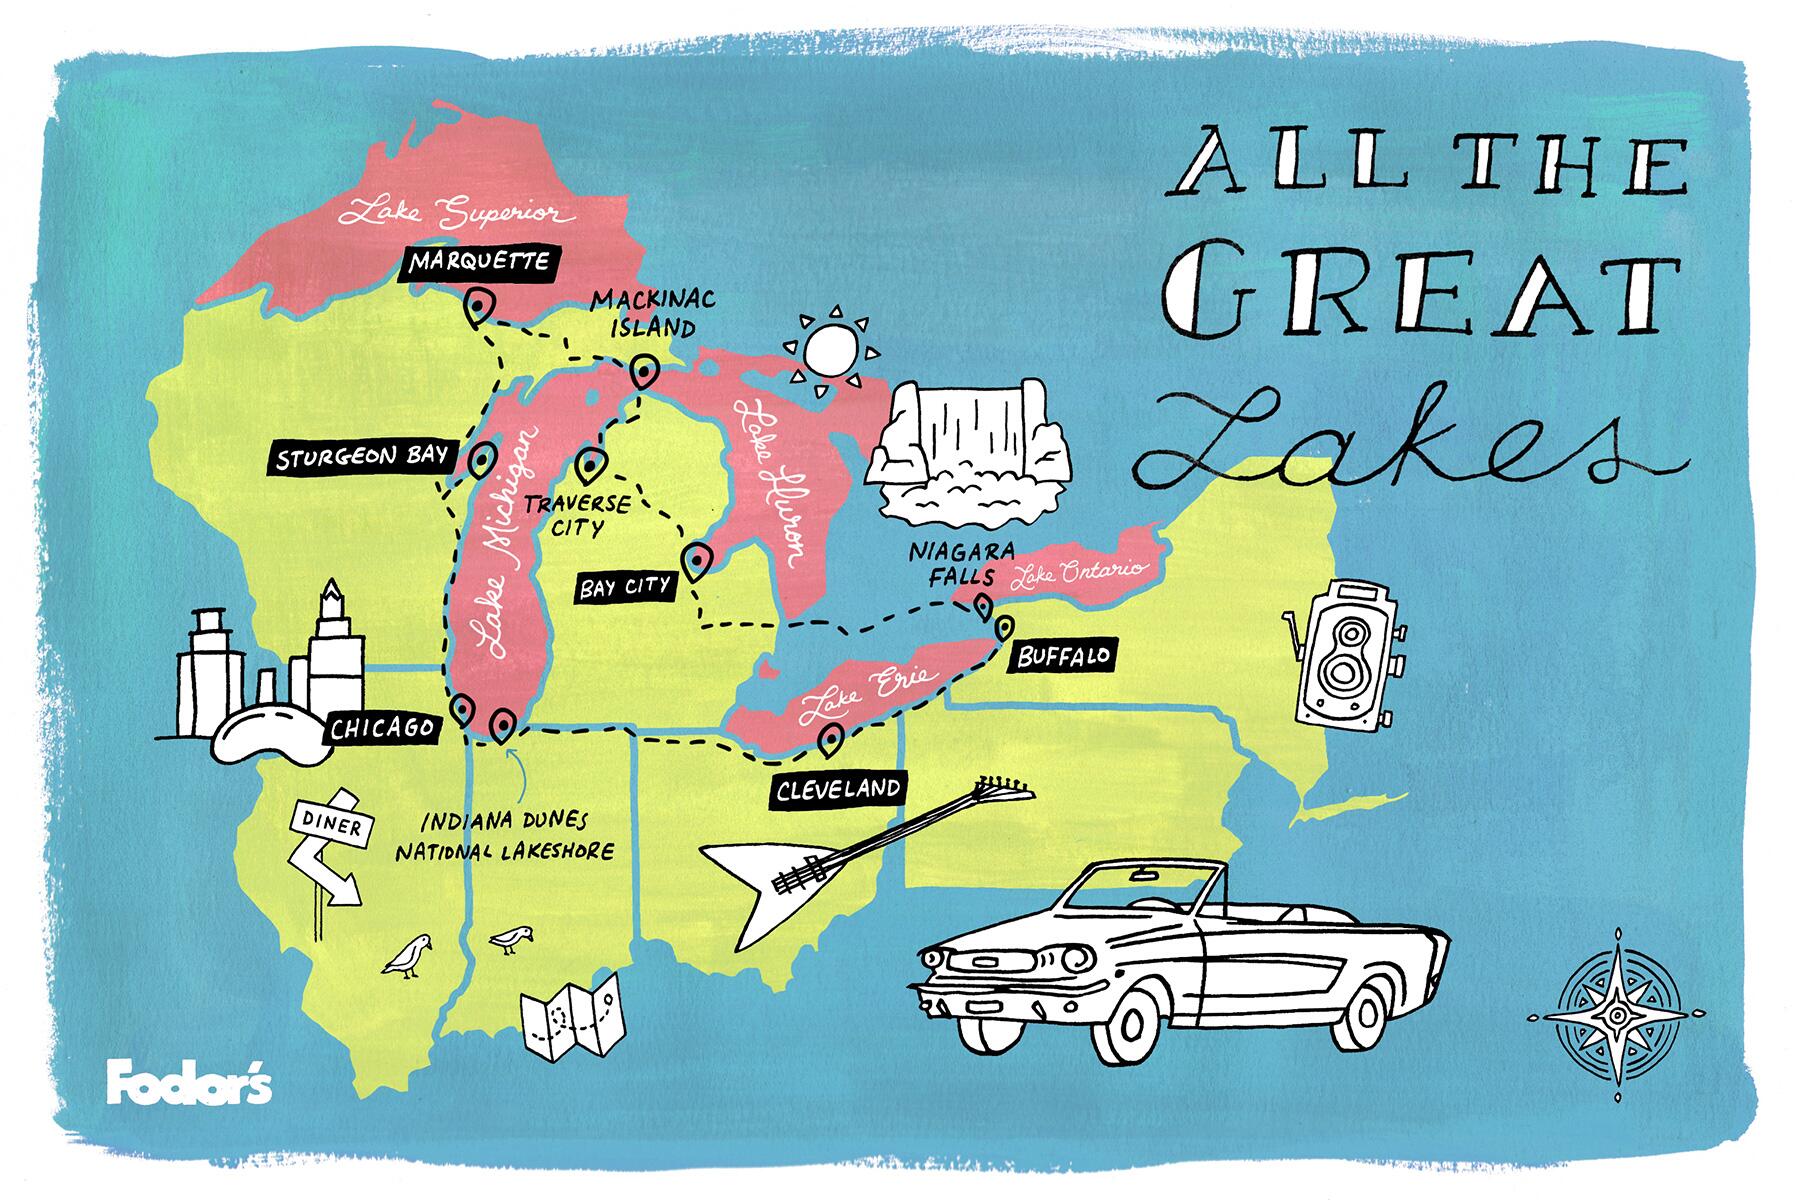 Road Trip Itinerary: A Trip to All the Great Lakes